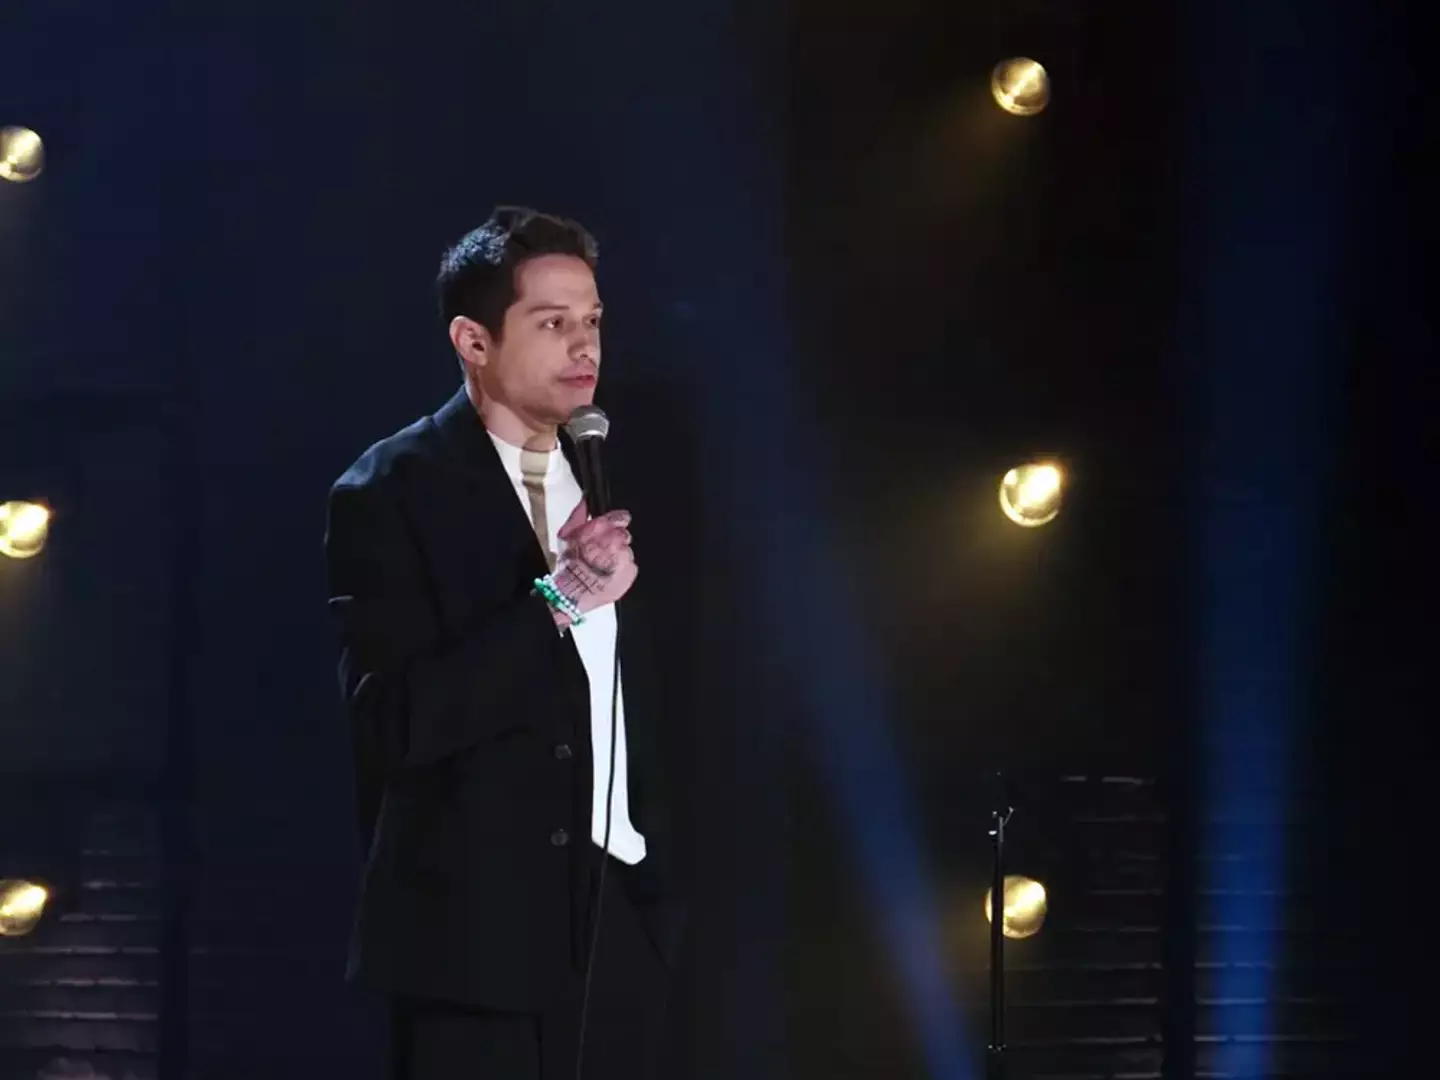 Pete Davidson fired a brutal joke at Ariana Grande after she claimed their relationship was merely a 'distraction'.